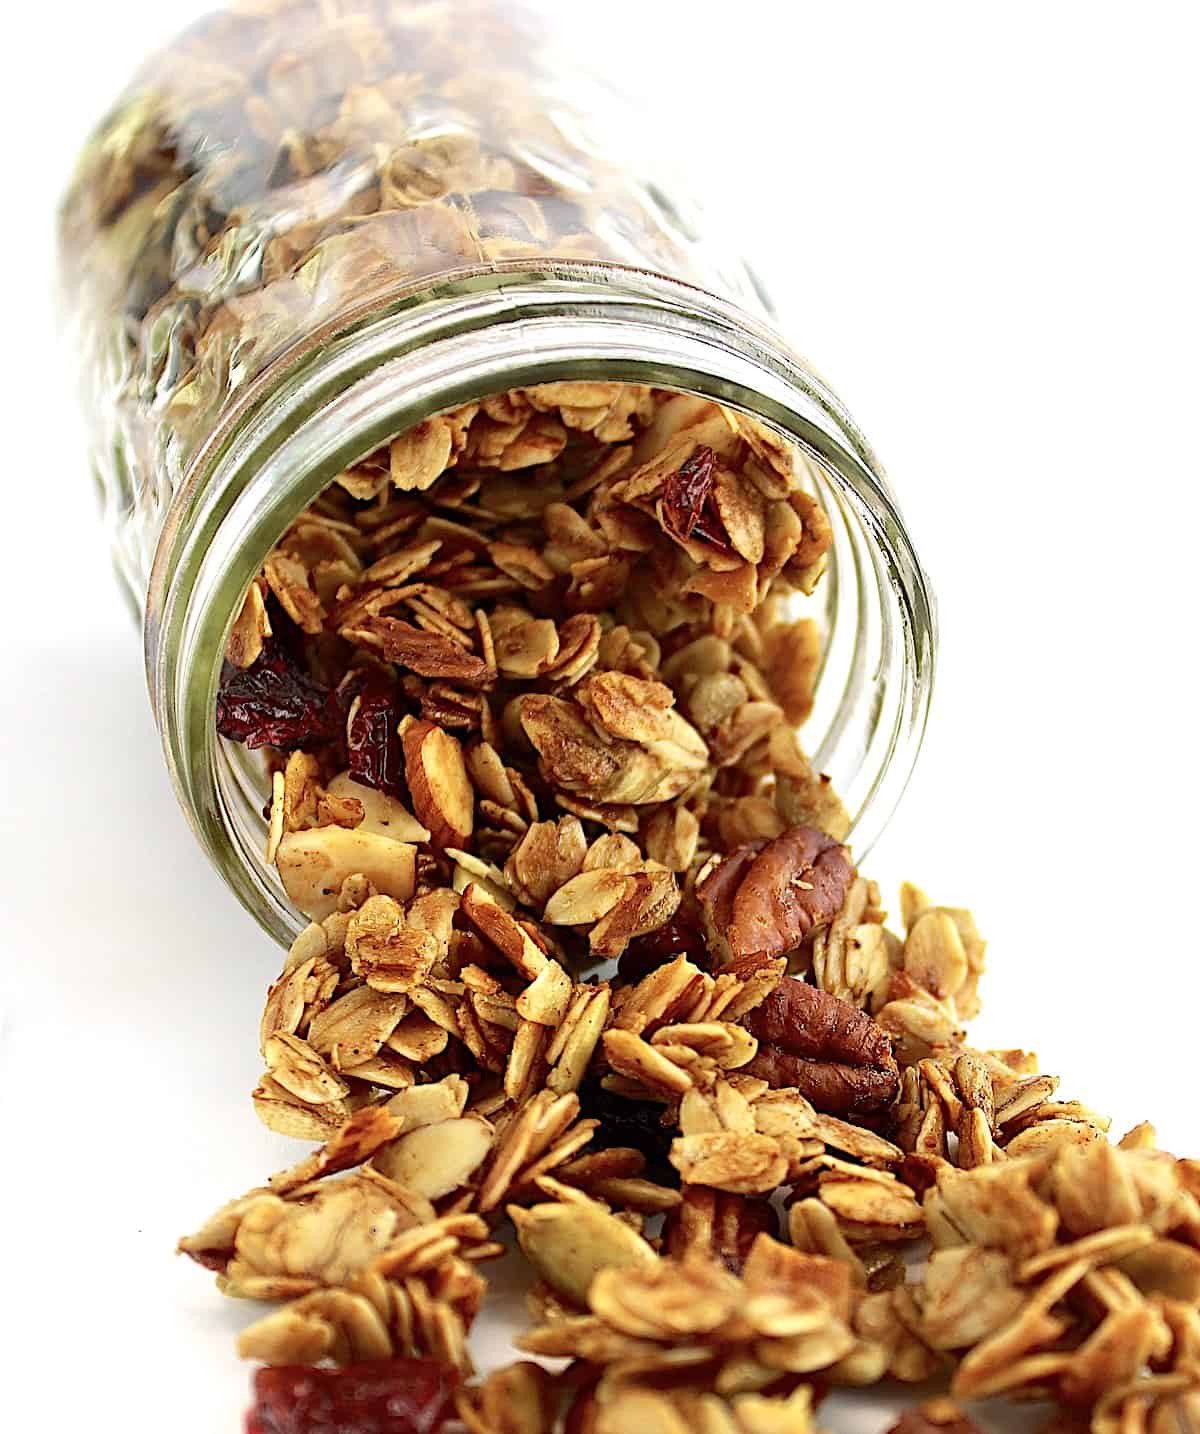 Homemade Granola spilling out of jar